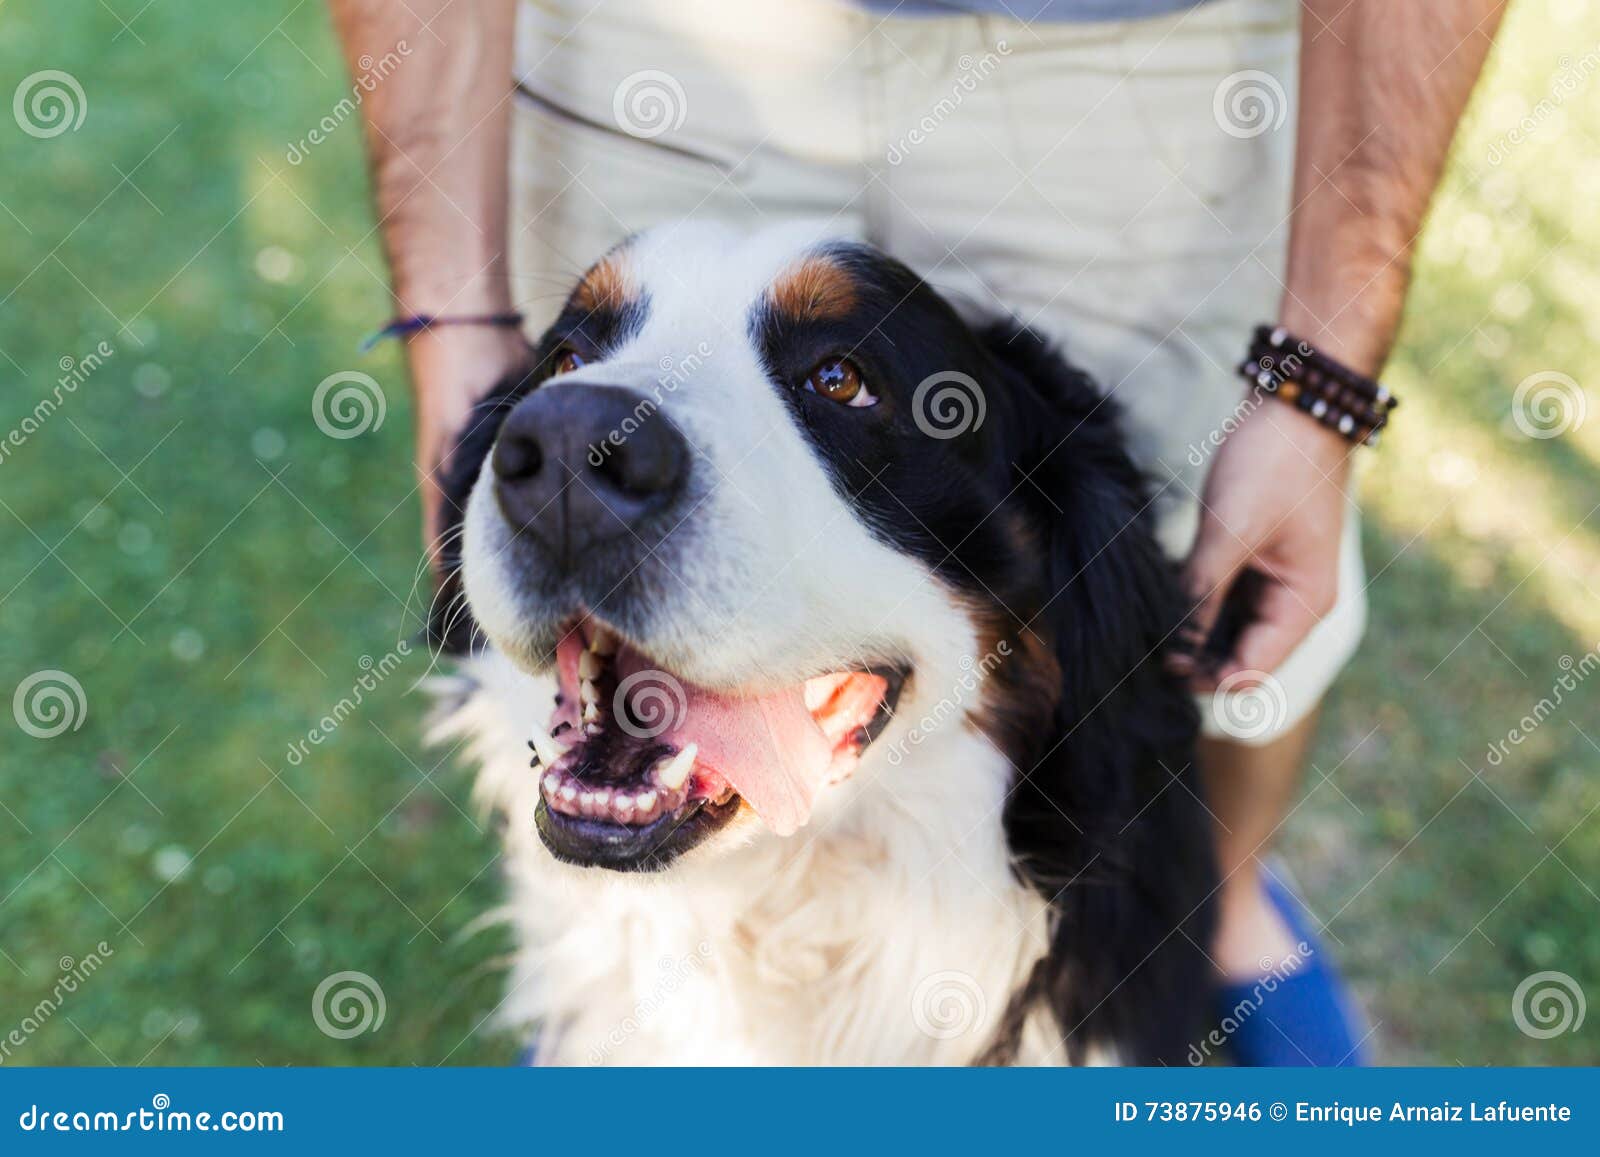 close up of a big dog with is tonge out and a man behind